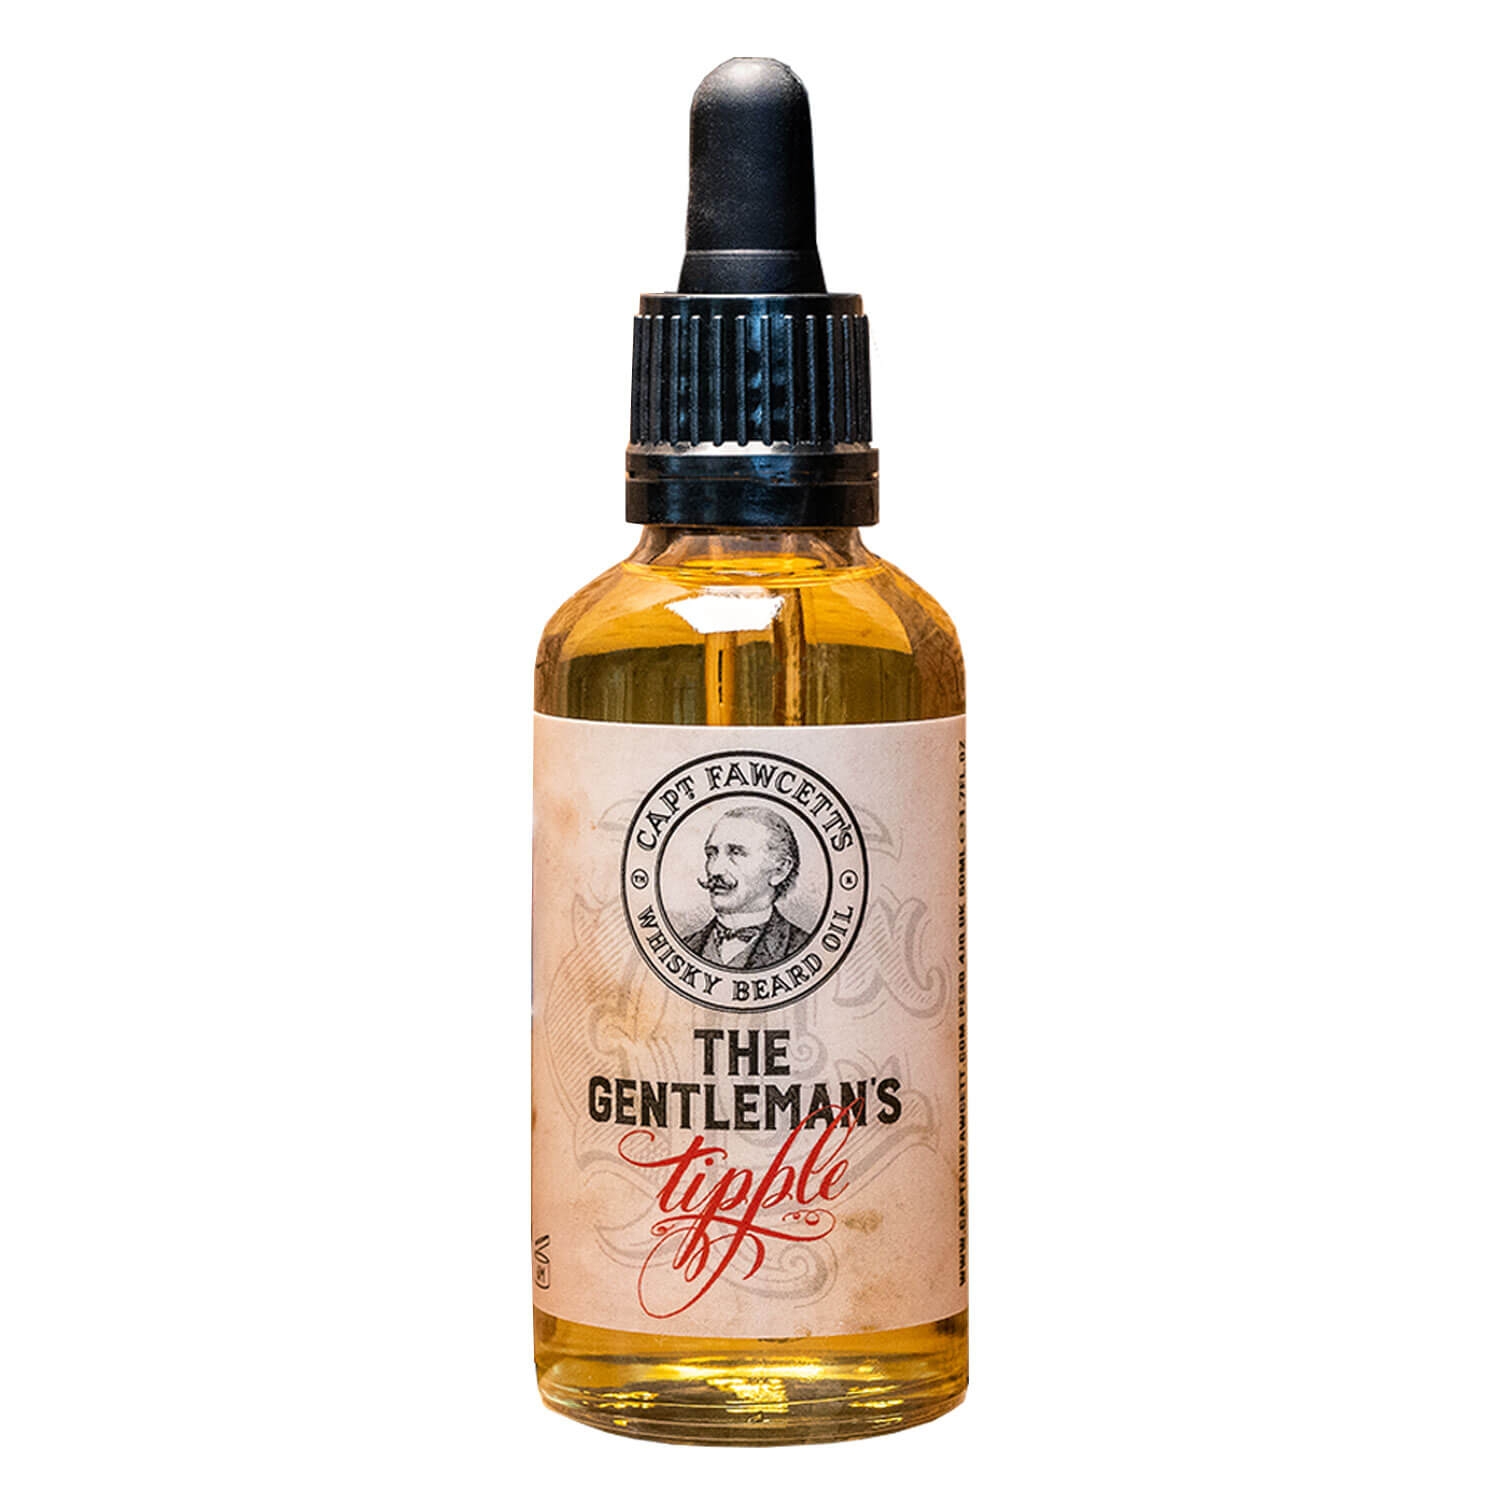 Product image from Capt. Fawcett Care - Whisky Beard Oil